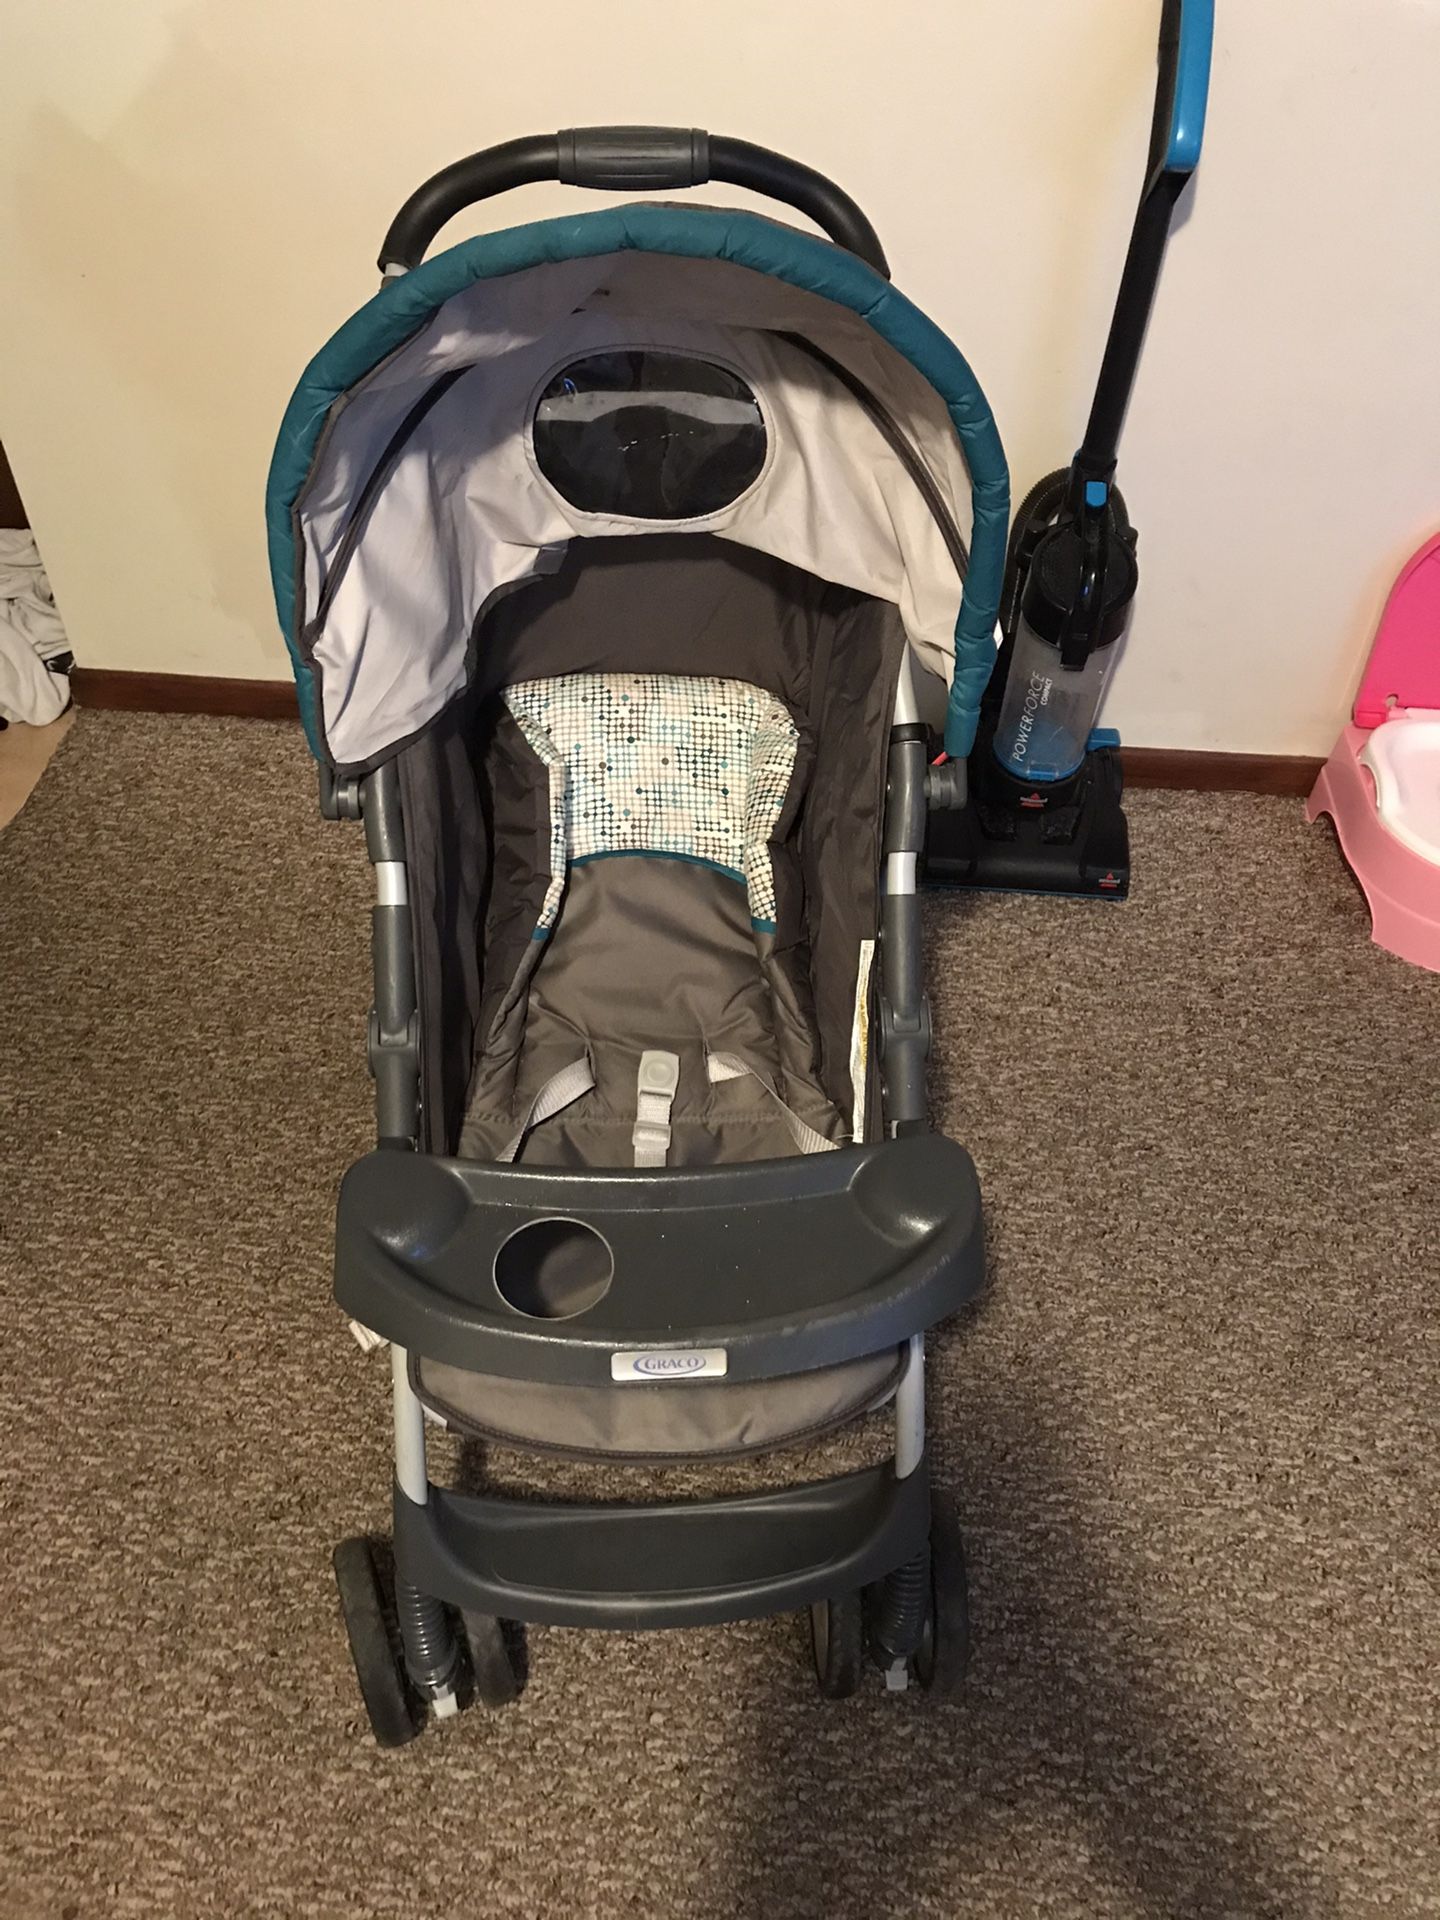 Gently used graco stroller